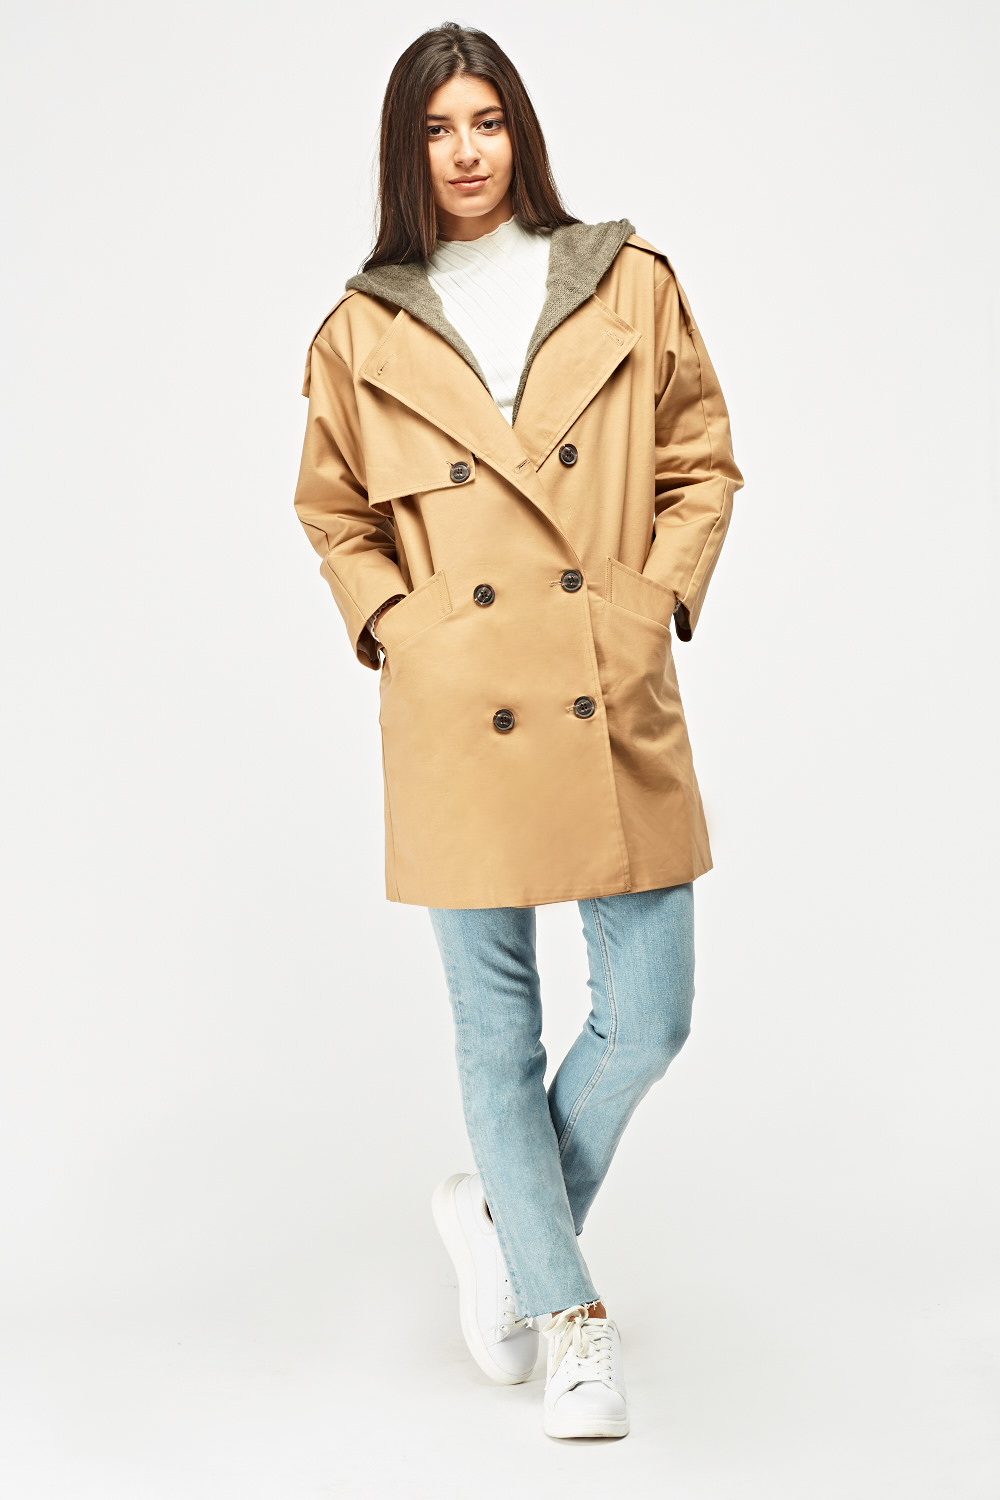 Contrast Hooded Trench Coat - Just $6